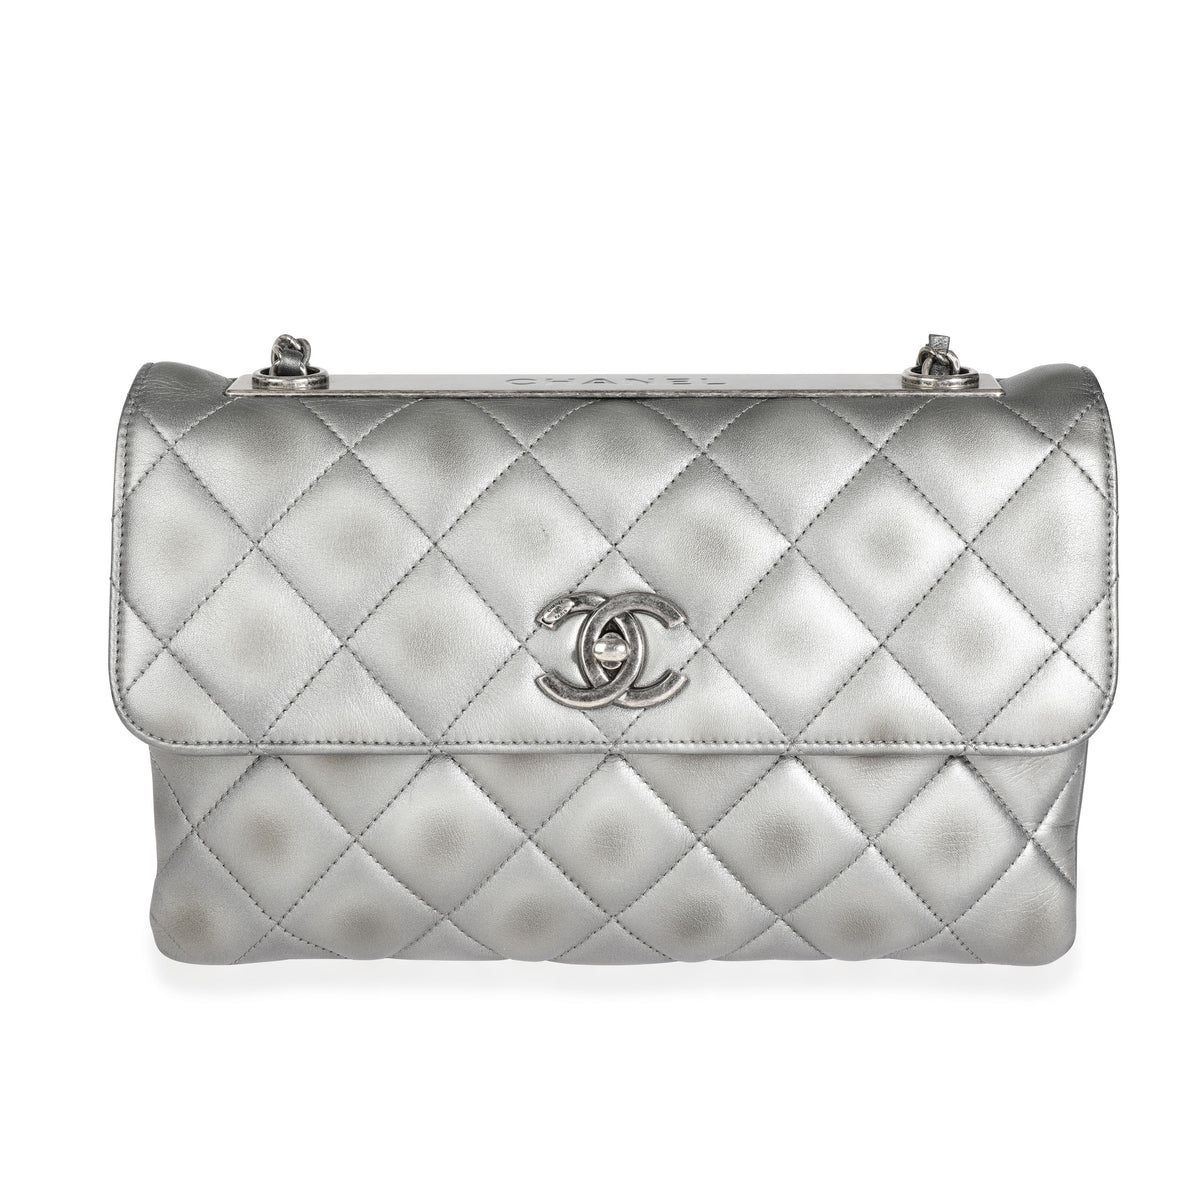 CHANEL Jumbo Flap Quilted Leather Shoulder Bag Metallic Silver